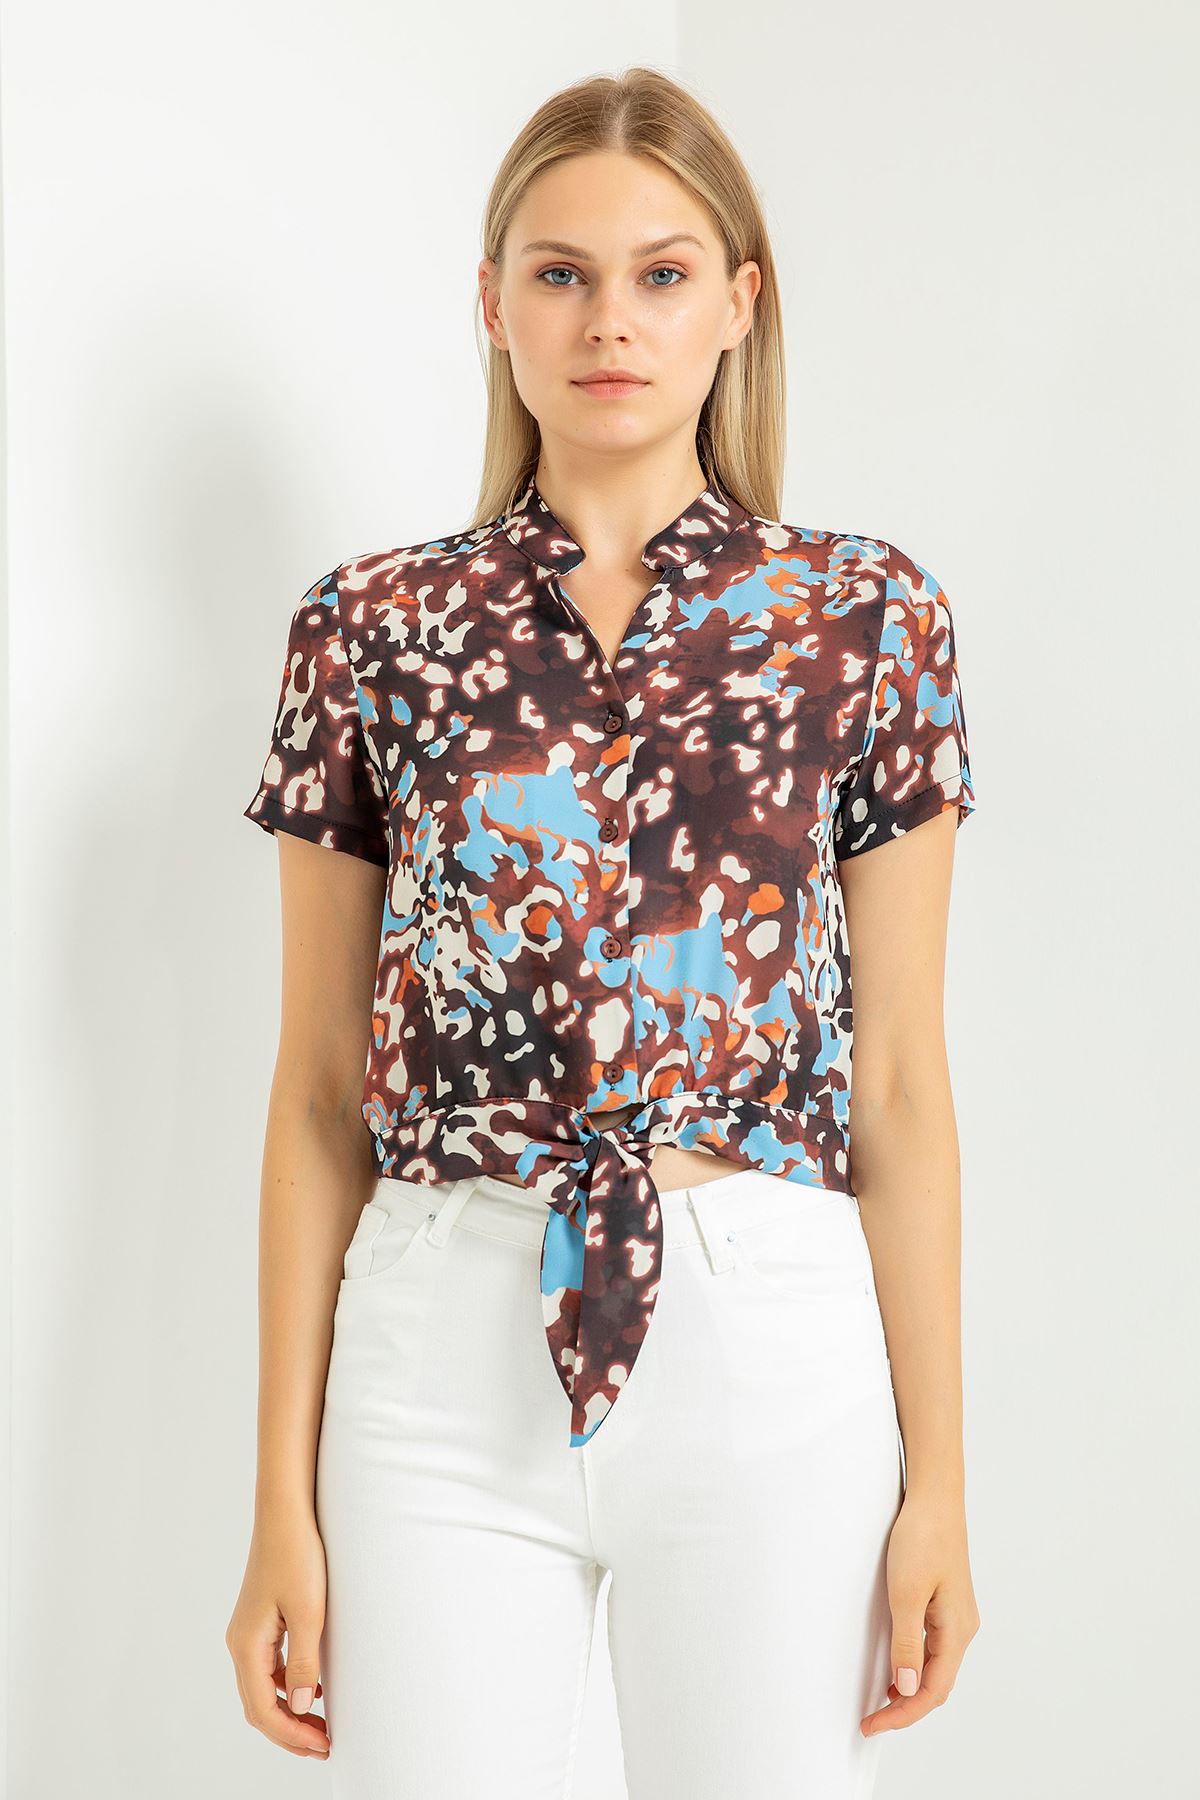 Jessica Blouse Short Sleeve Shirt Collar Leopard Print With Tie Front Blouse - Light Blue